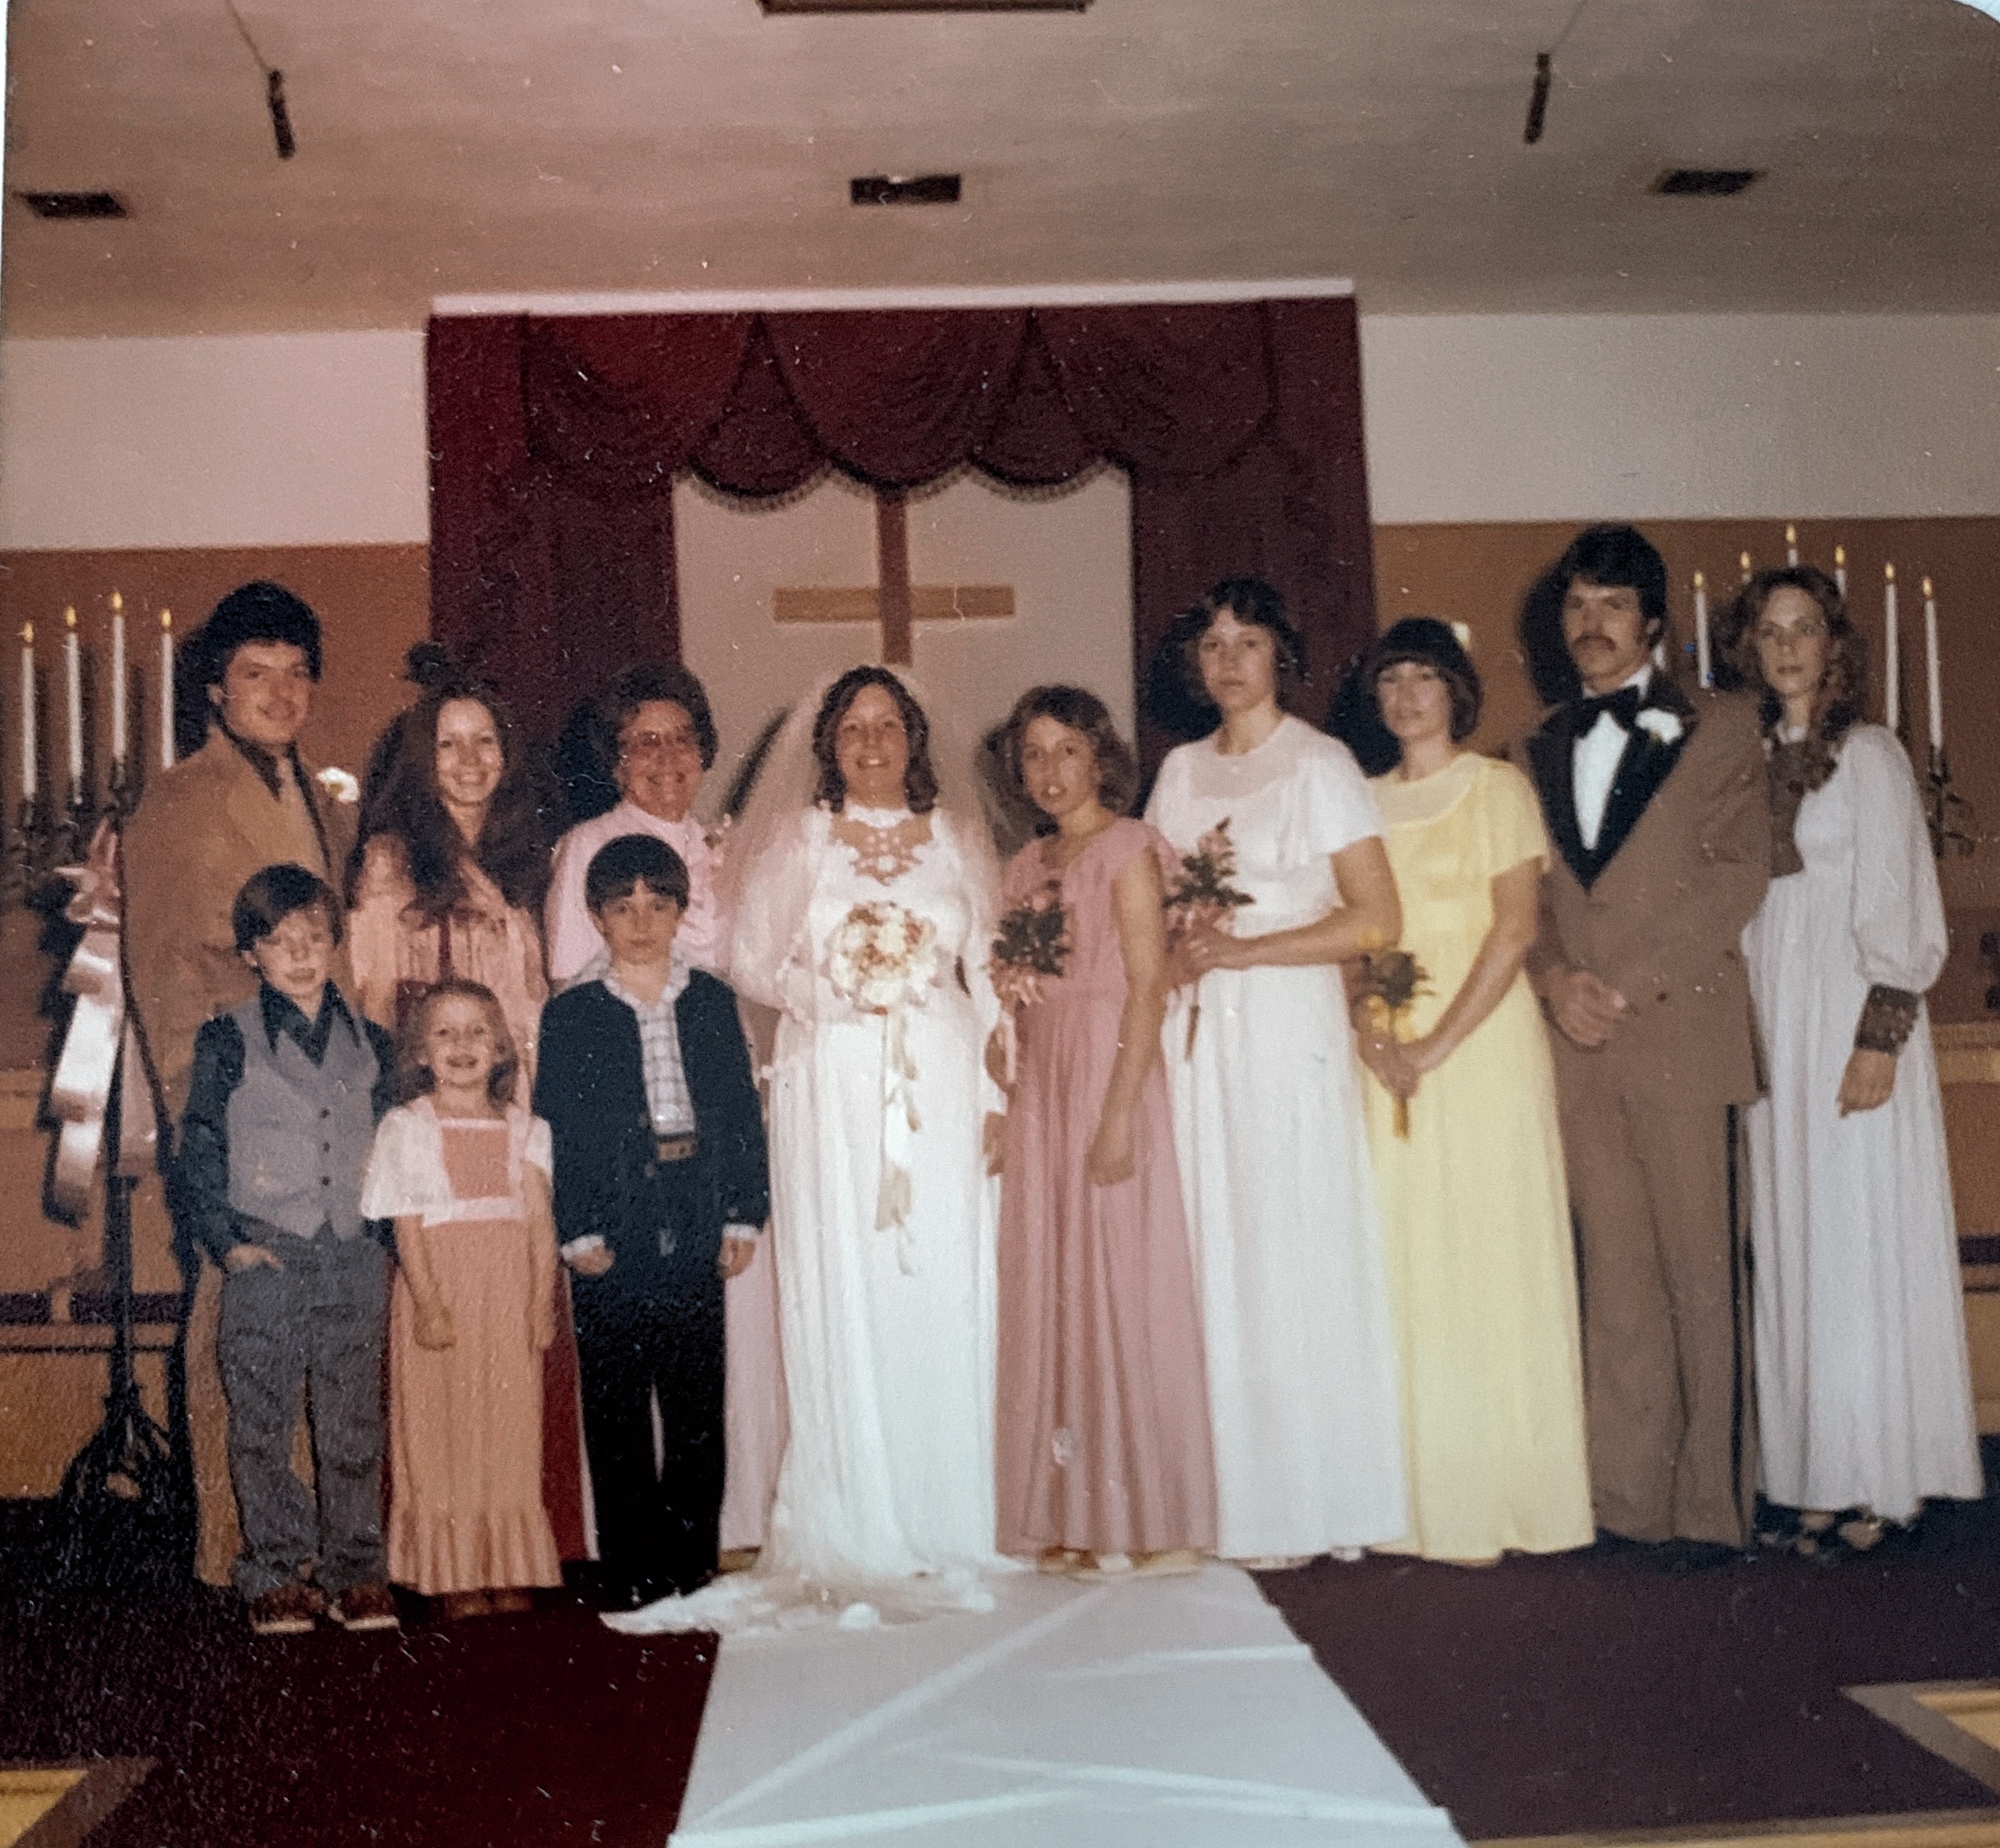 Jerome, Linda, Mom, me, Debi, Lisa Gail, Kaye, Phil, Lisa Shannon. Front row is Jerome Jr, Tina Marie, and Greg. Picture taken March 18, 1978. MY WEDDING DAY.